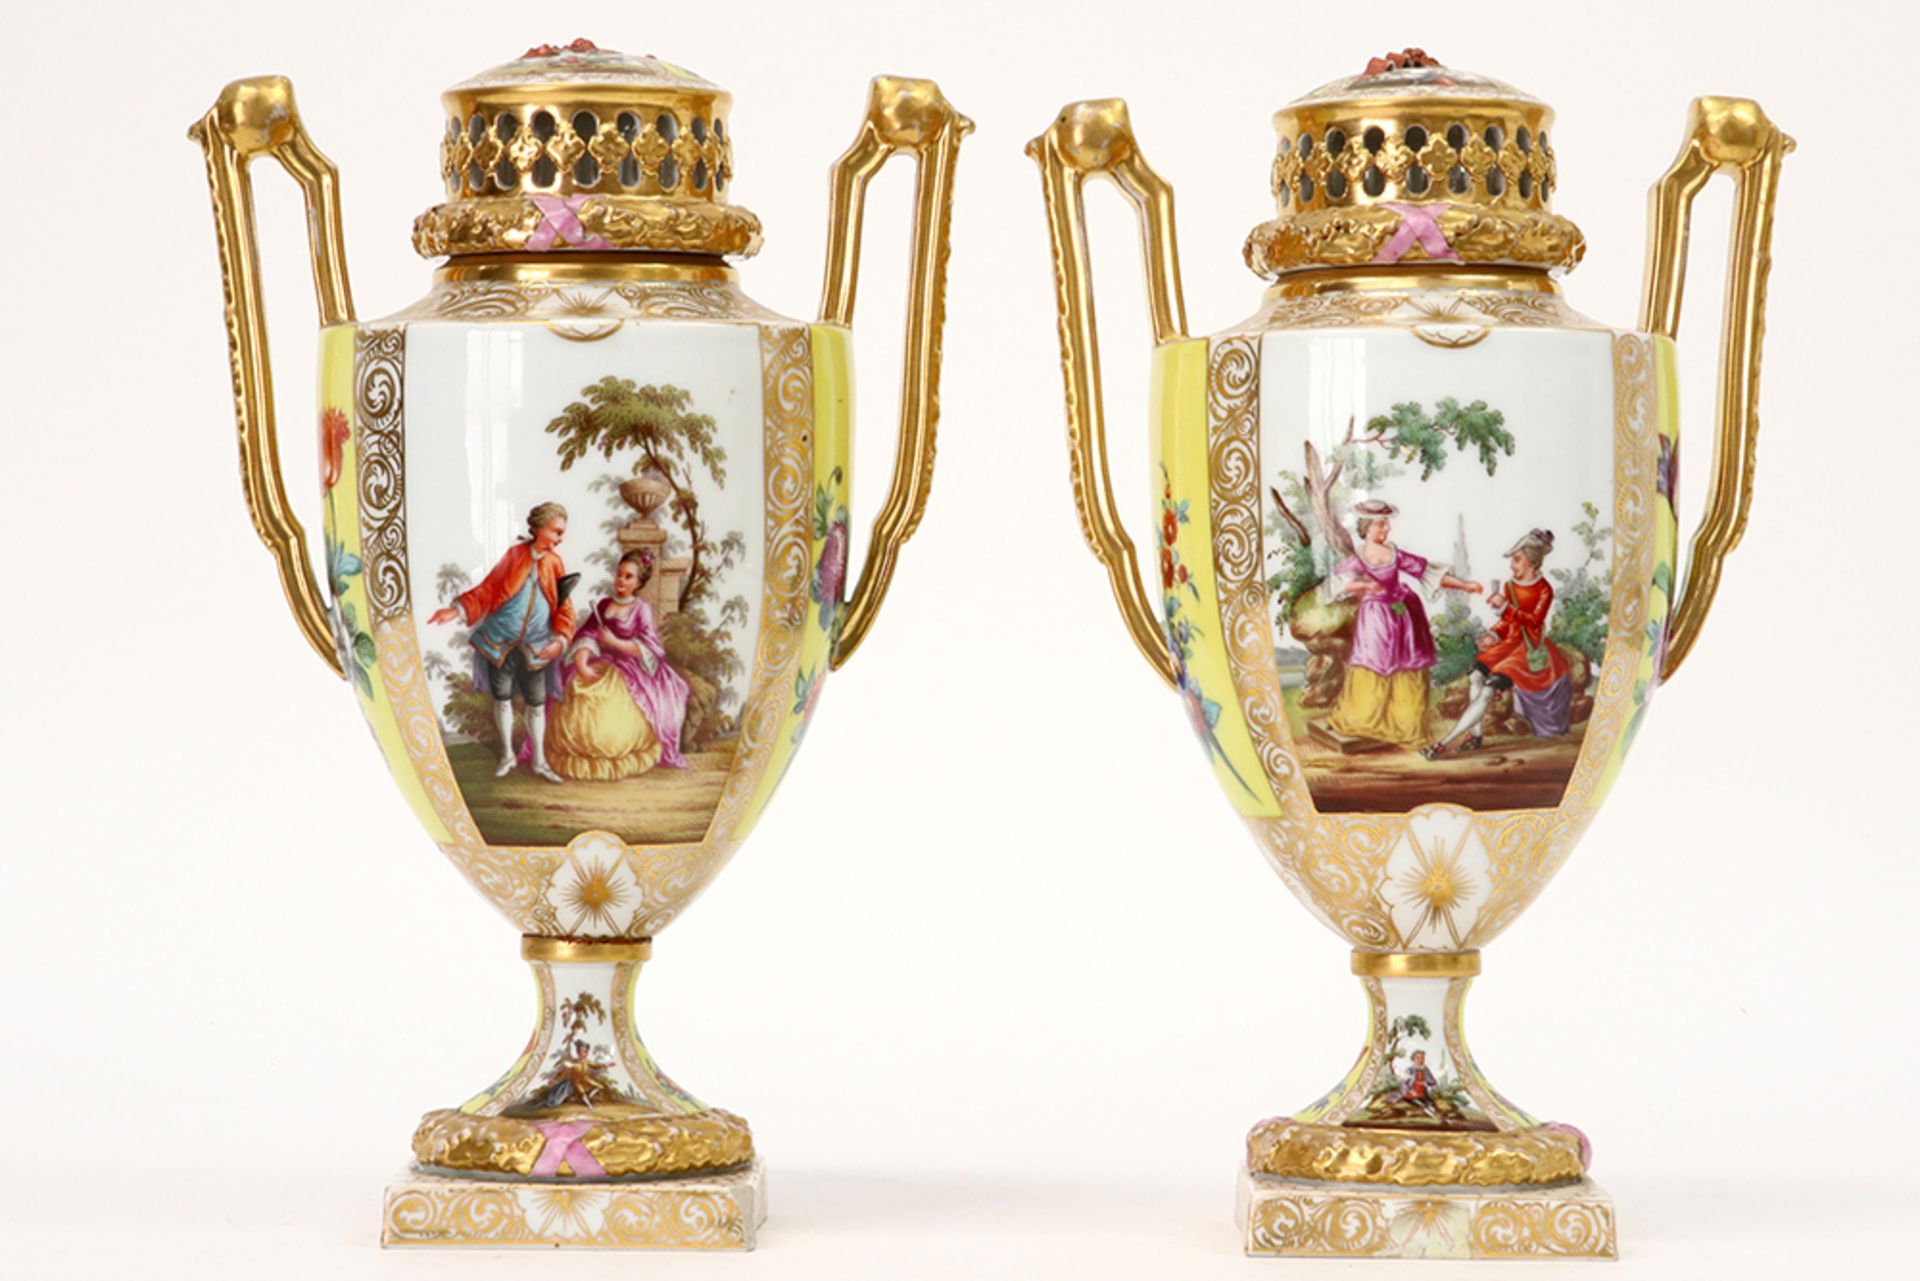 pair of antique neoclassical lidded vases in "AR (Augustus Rex)" marked porcelain with finely - Image 2 of 5